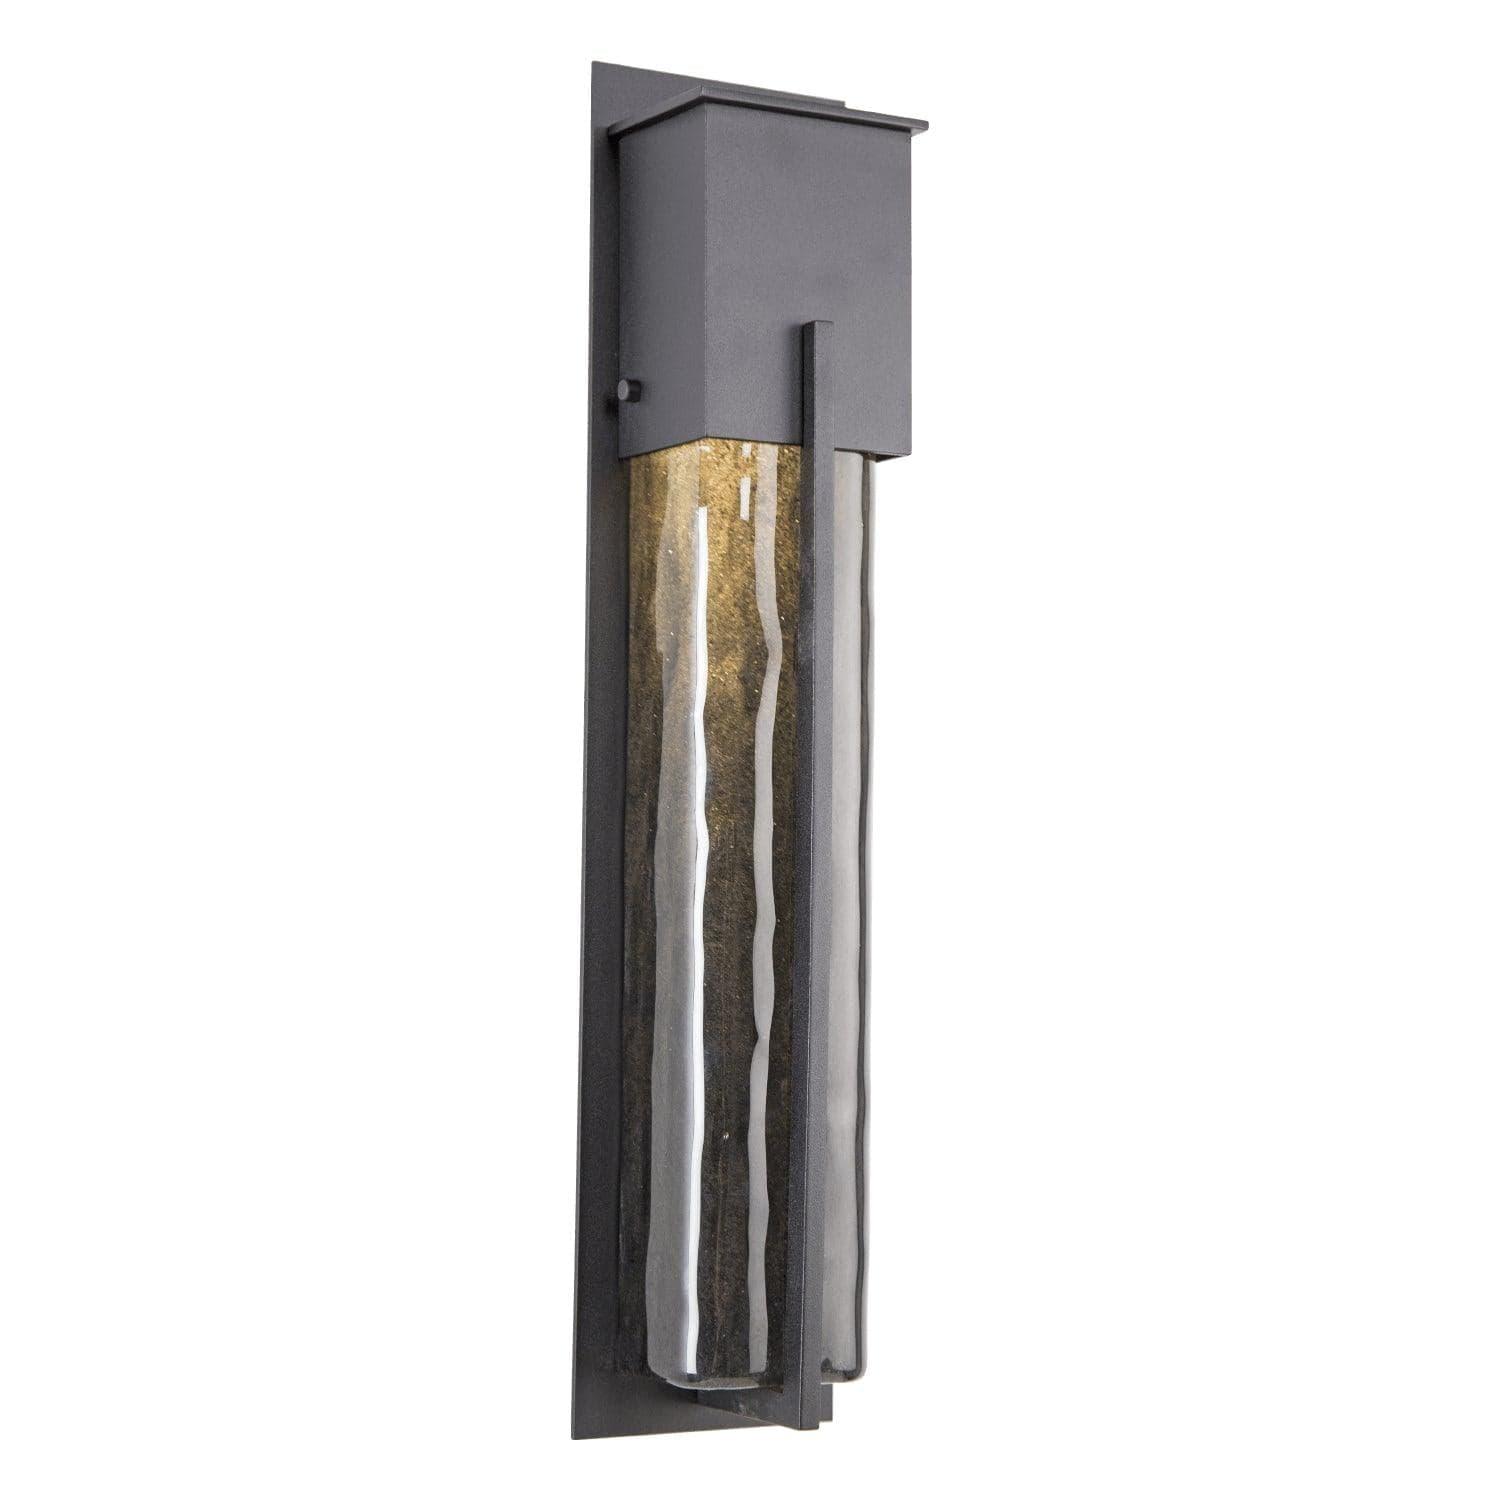 Hammerton Studio - Outdoor Tall Square Cover Sconce with Metalwork - ODB0055-23-TB-SG-G1 | Montreal Lighting & Hardware